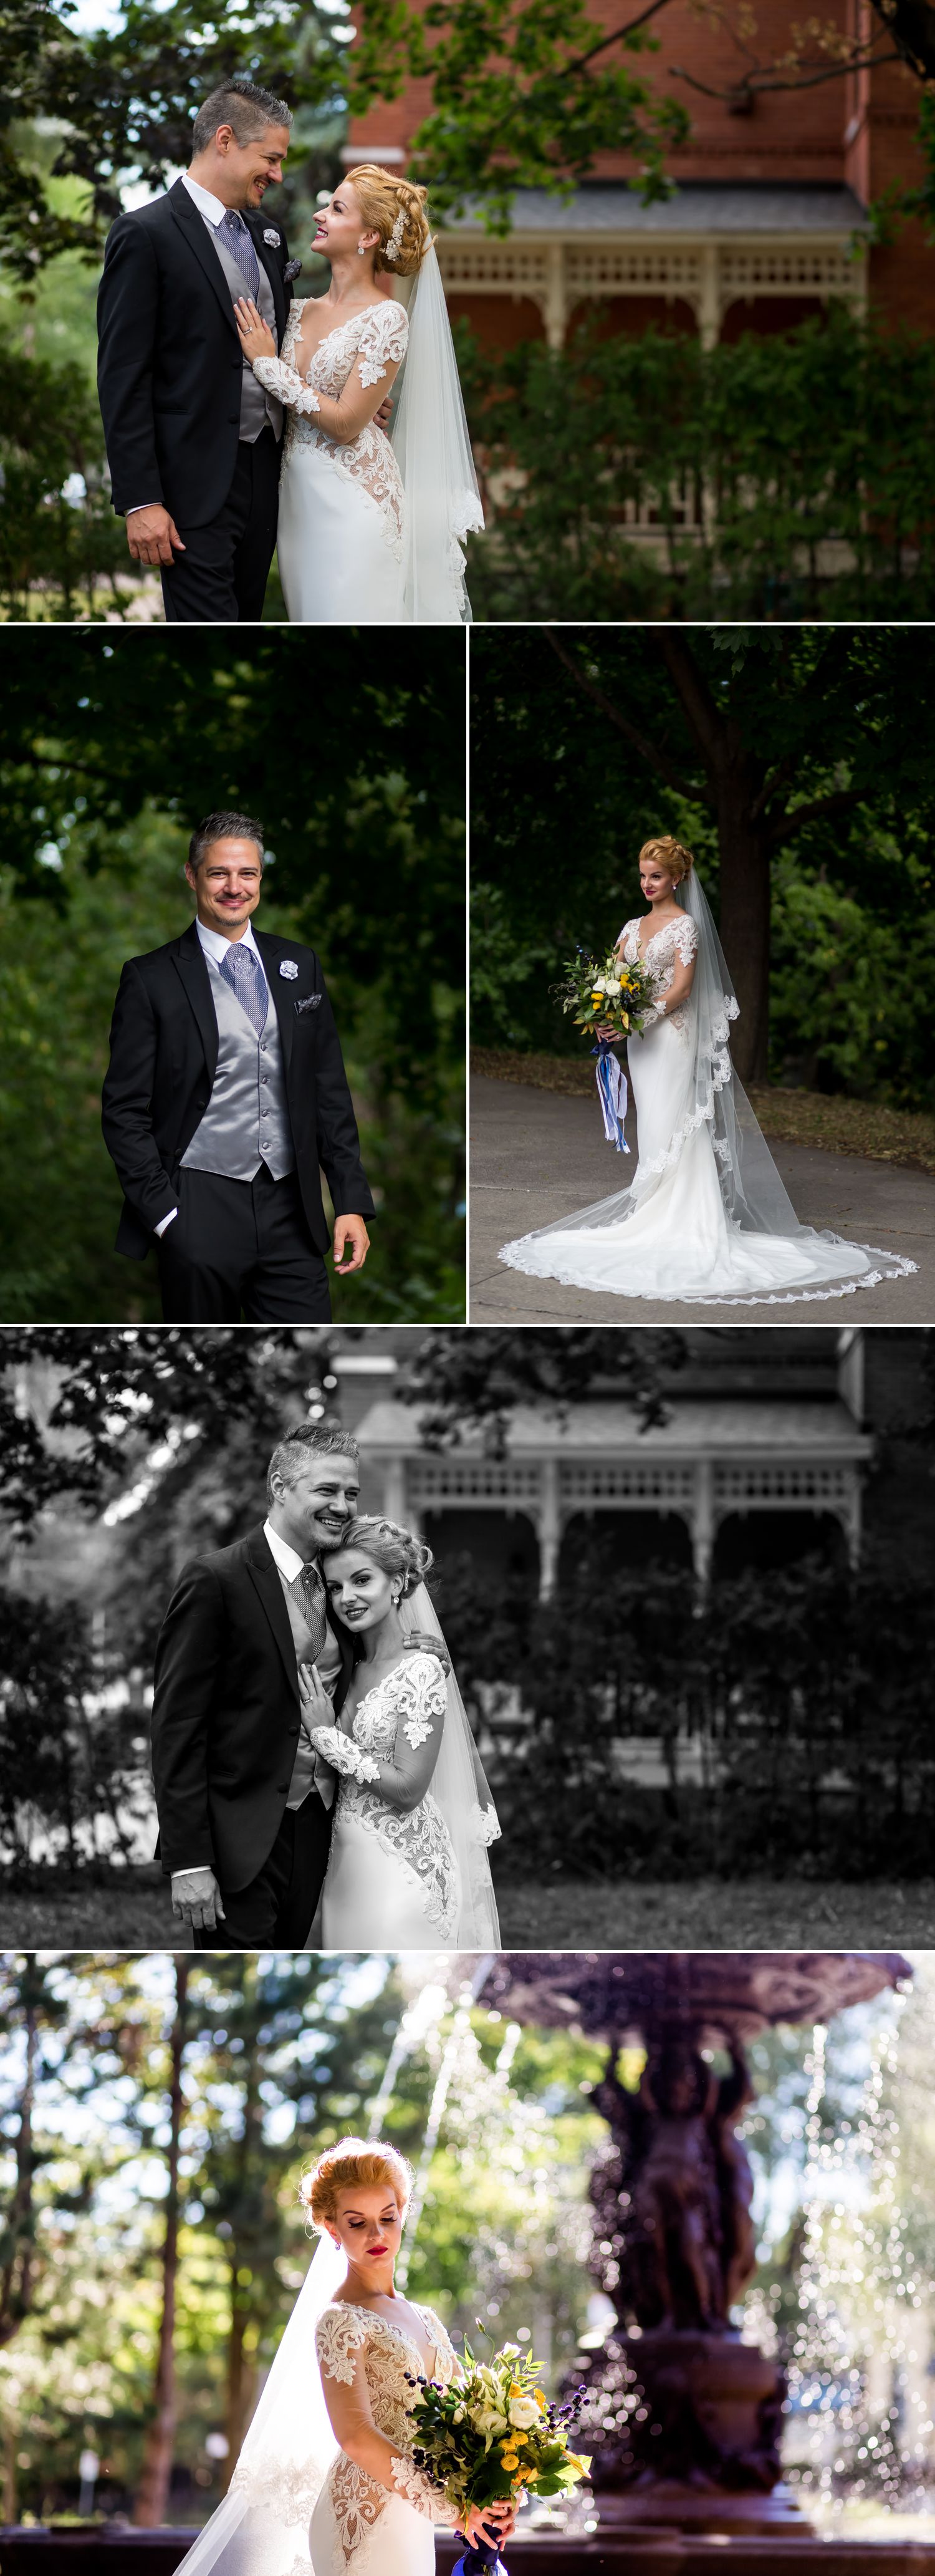 Portraits of the bride and groom after their wedding ceremony at Le Cordon Bleu